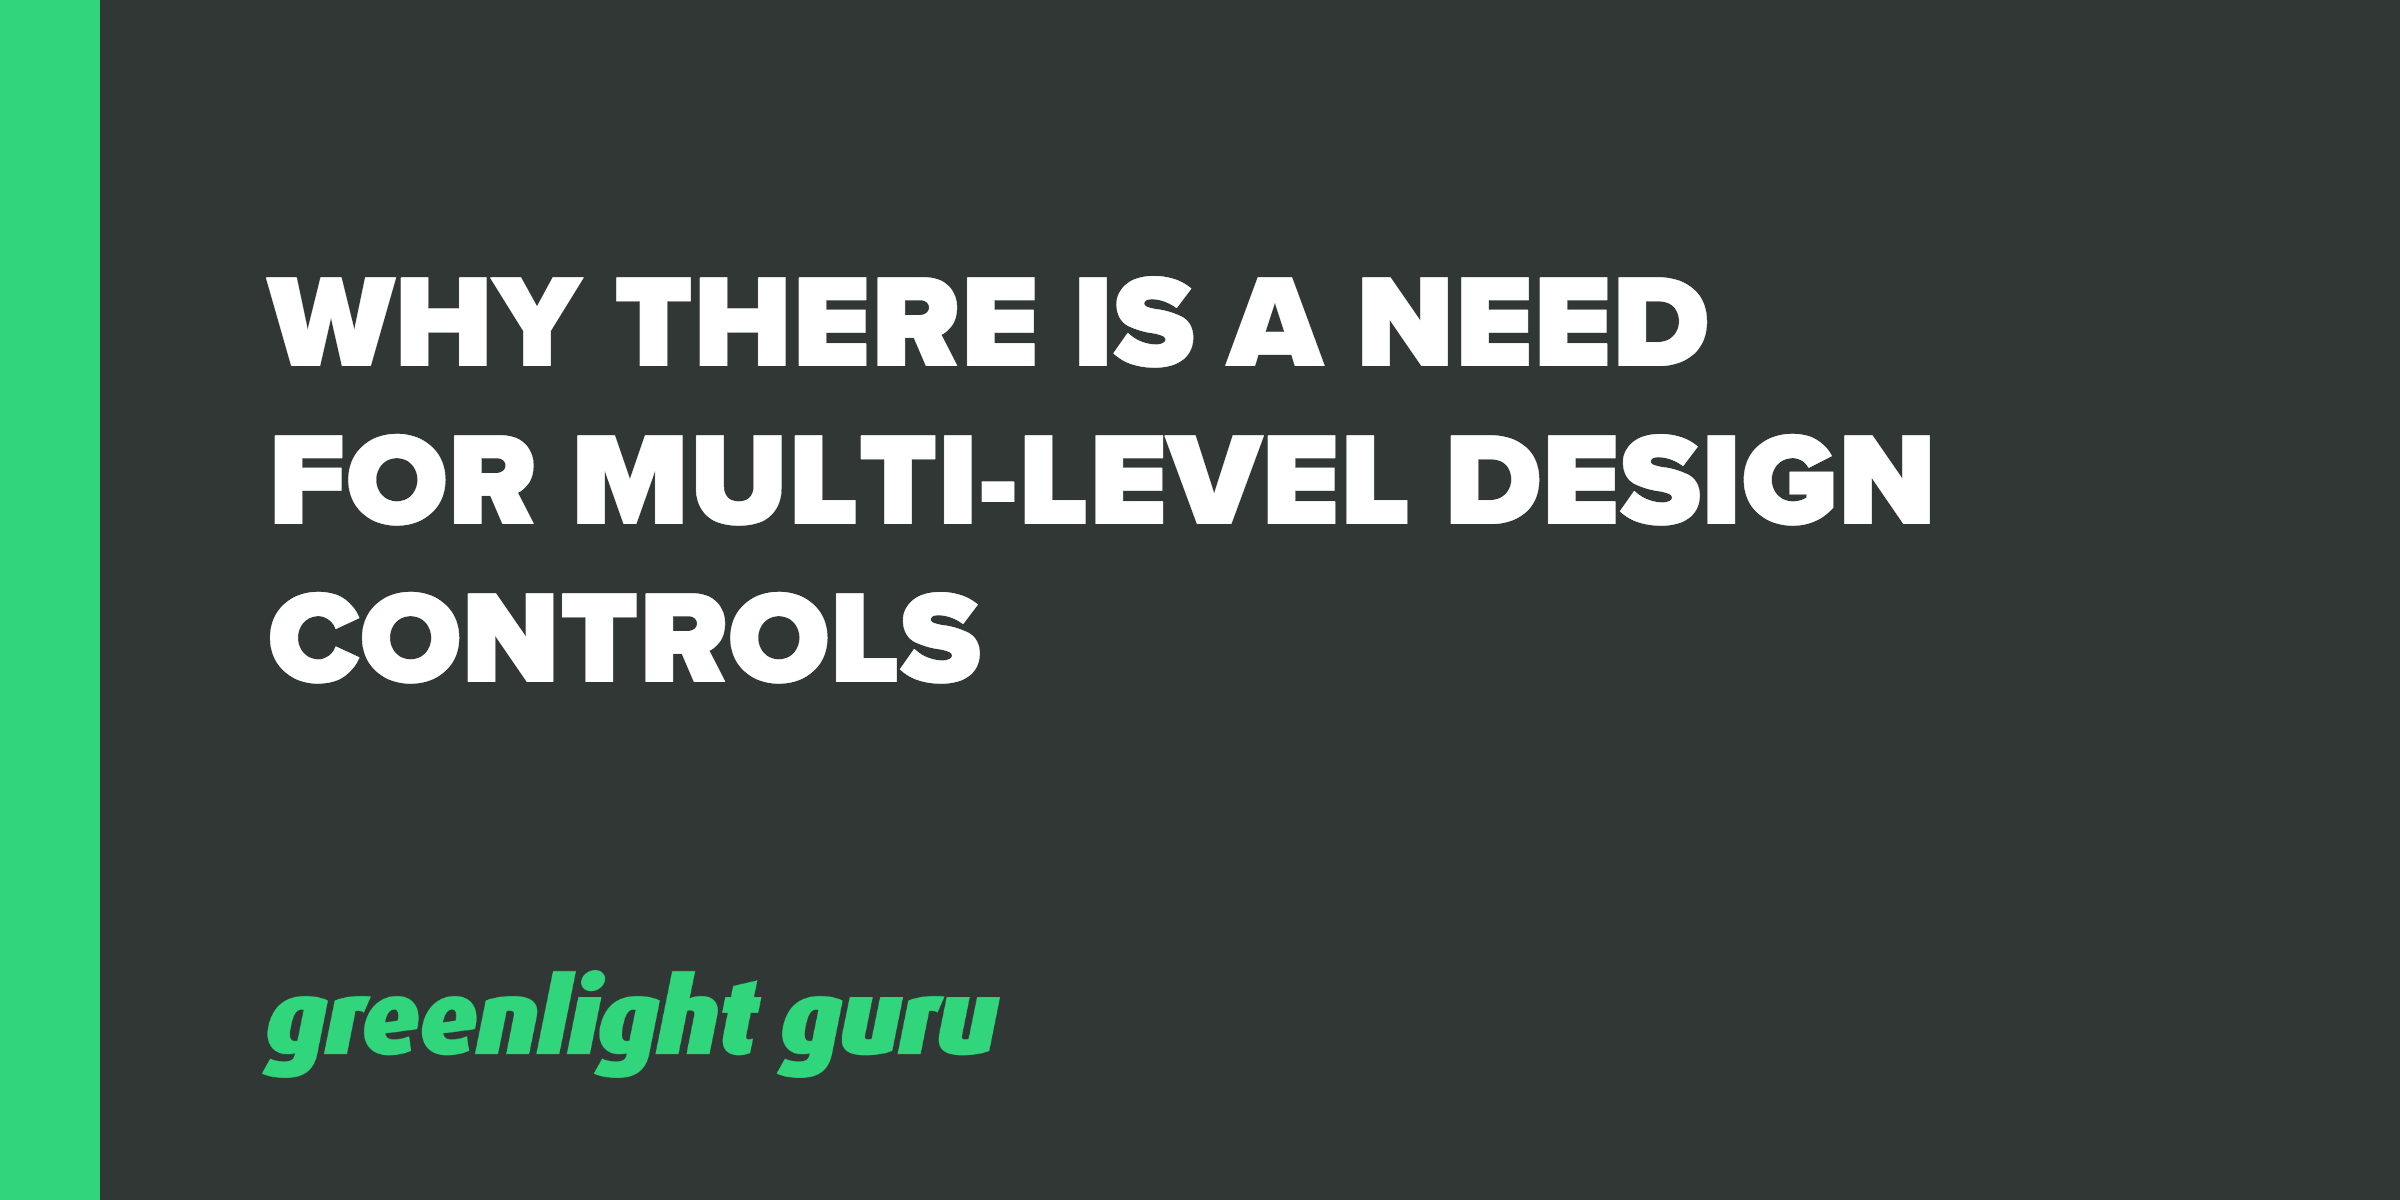 FEATURED-IMAGE_Why There is a Need for Multi-Level Design Controls